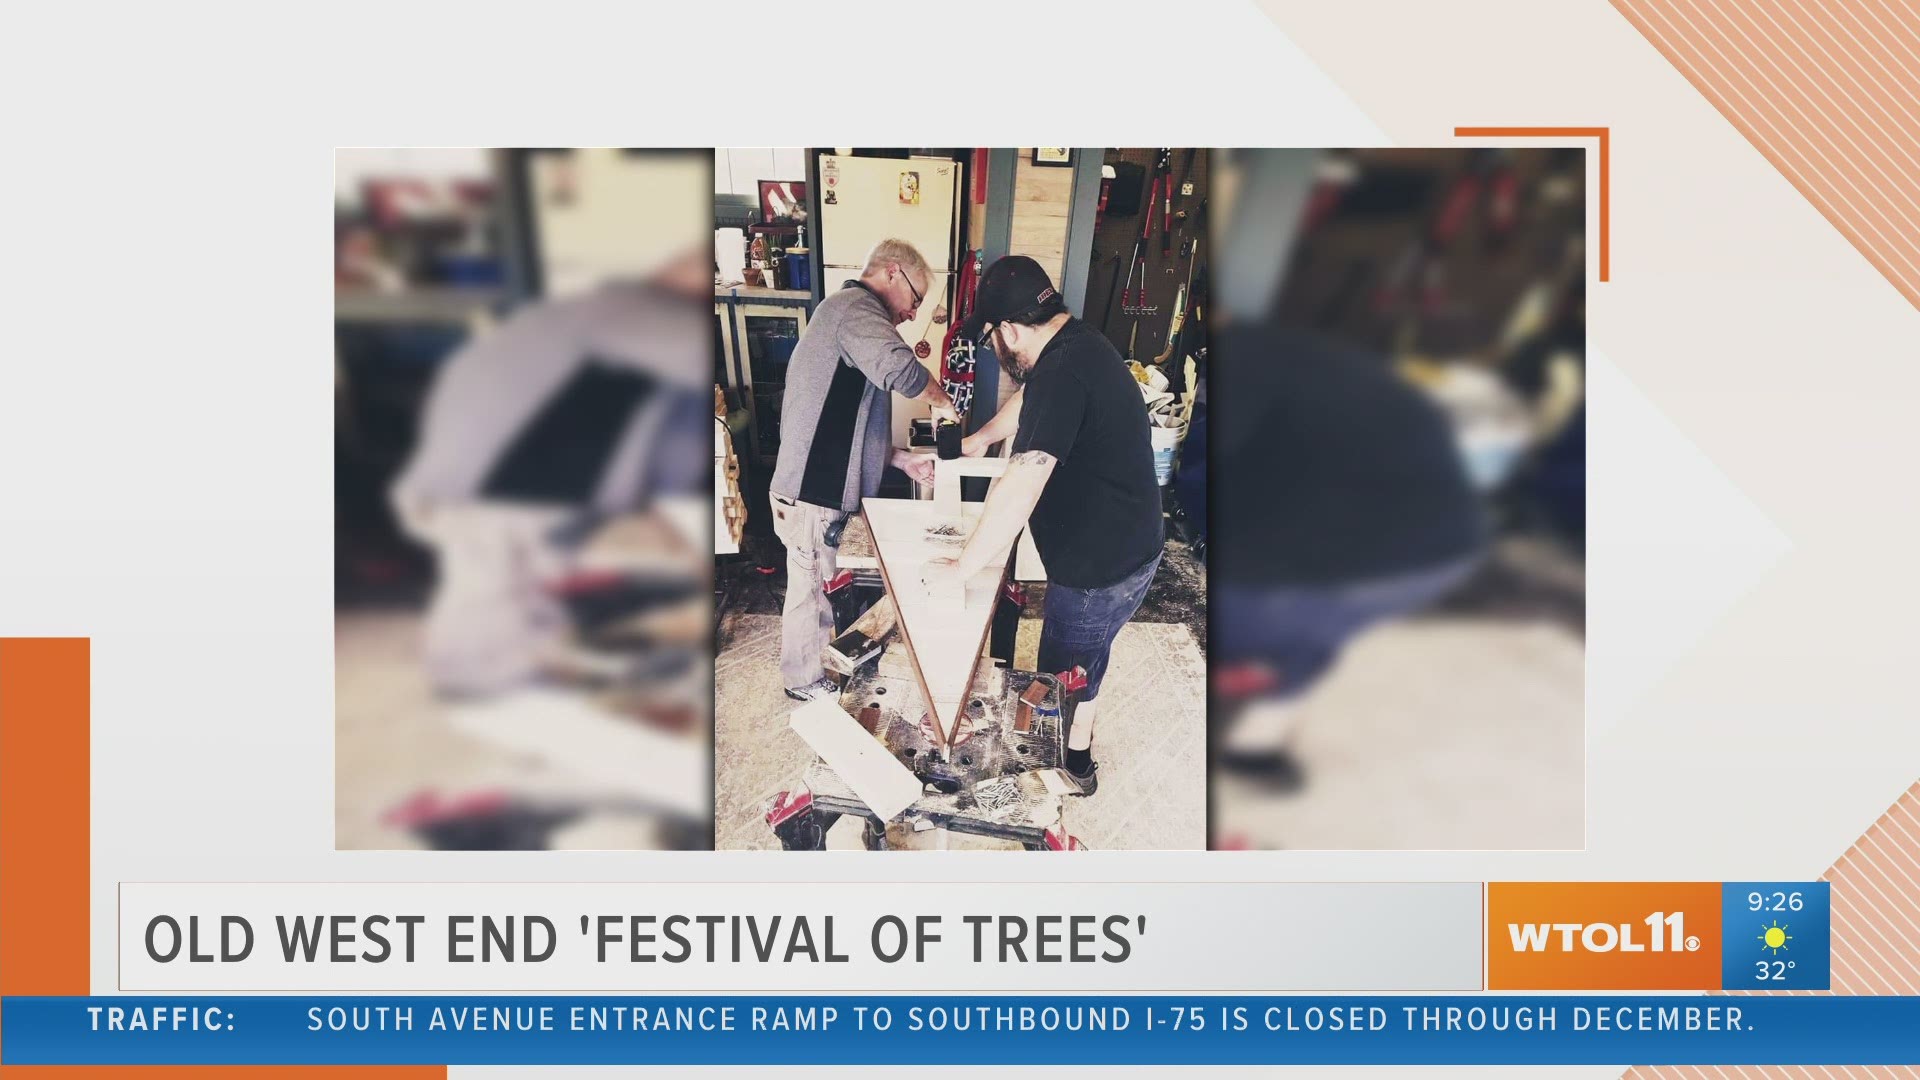 Enjoy a tree tradition this year - the Old West End Festival of Trees! Here's how you can check them out.